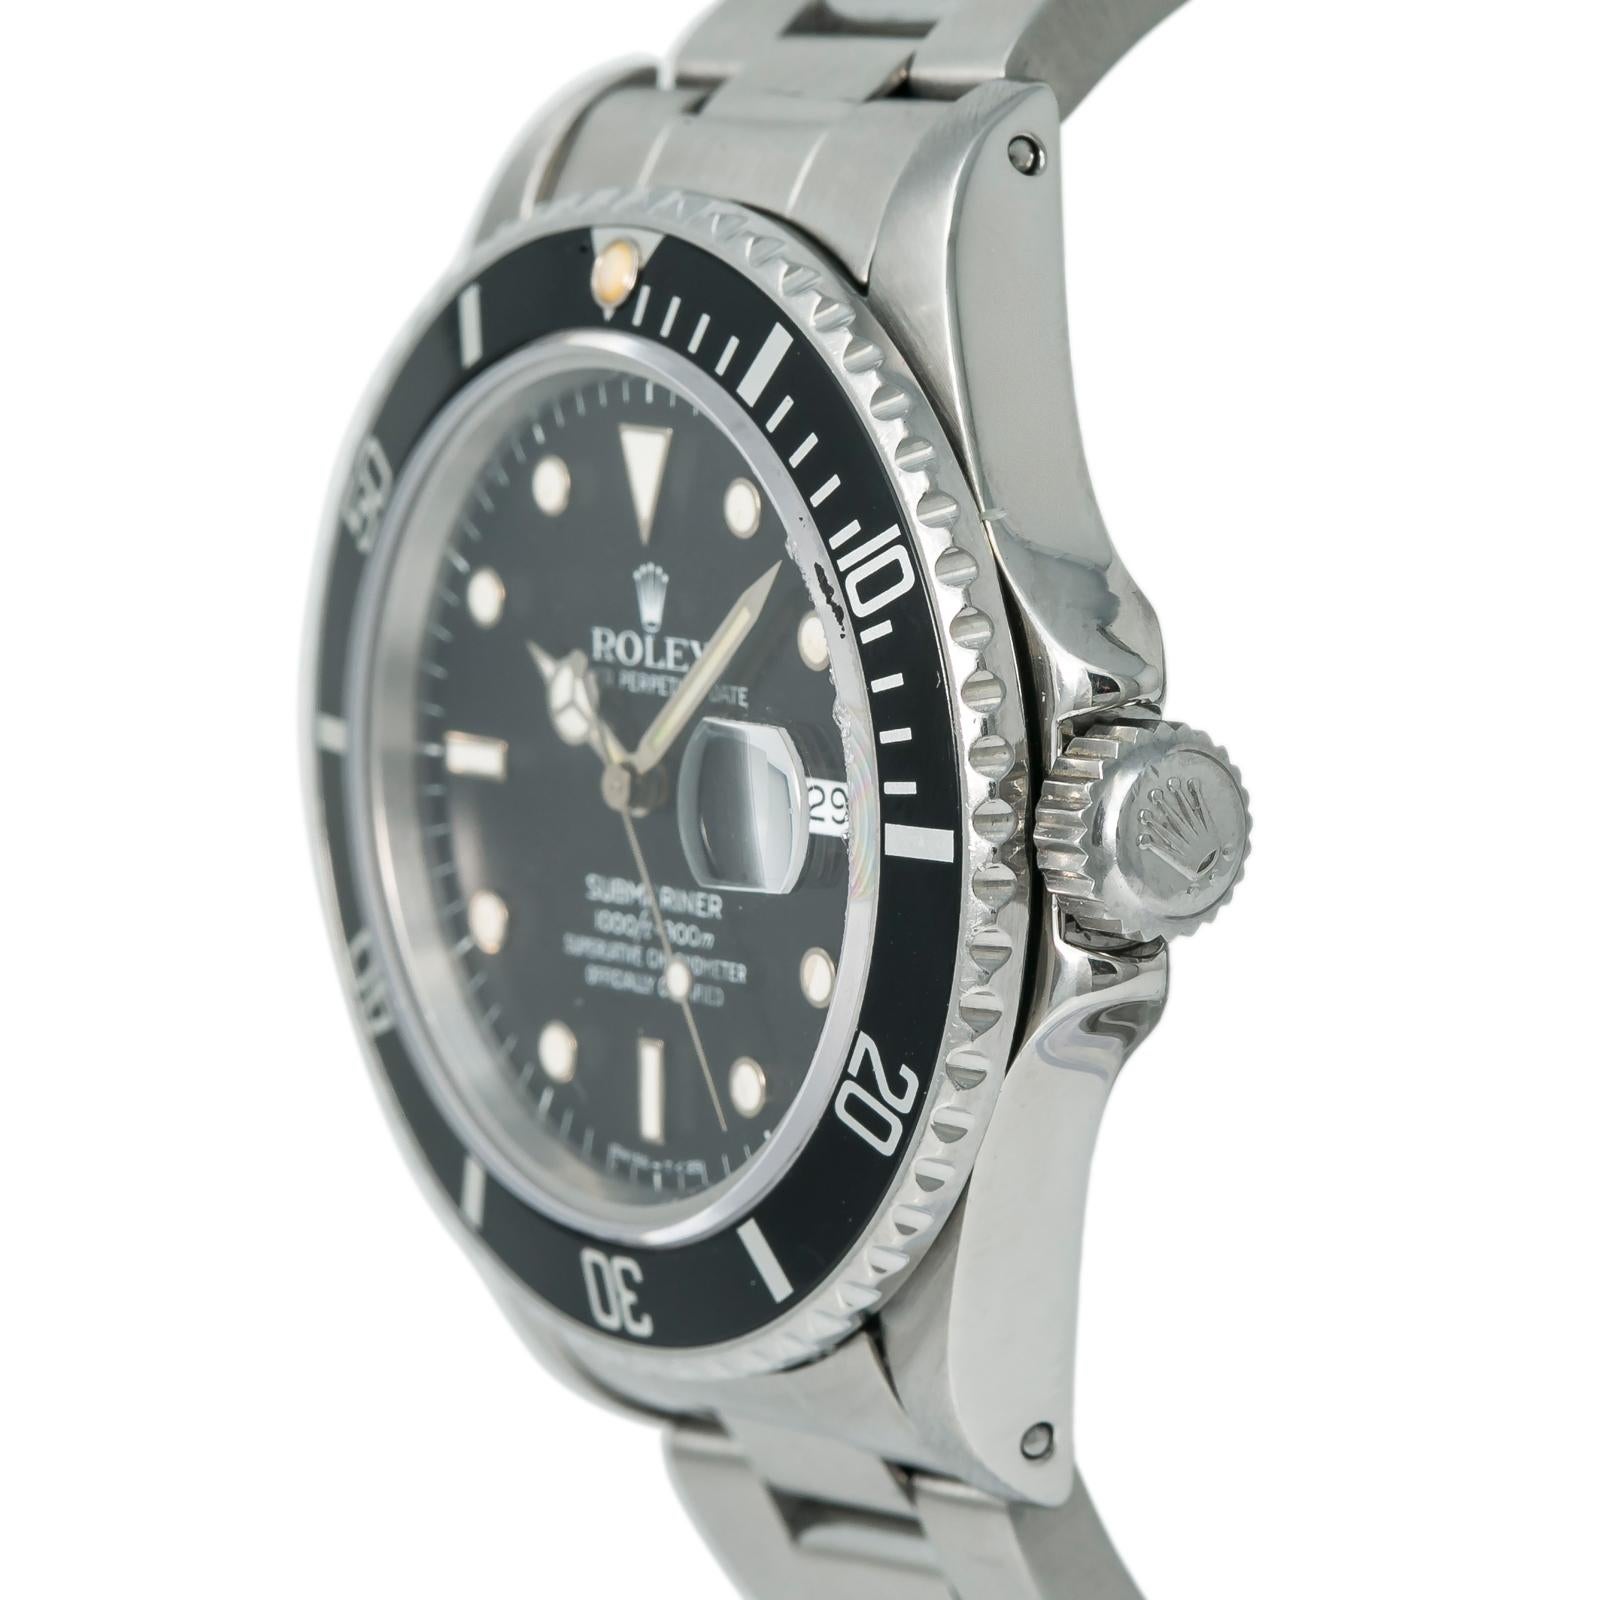 Contemporary Rolex Submariner 16800 Men's Automatic Watch Stainless Steel Black Dial For Sale